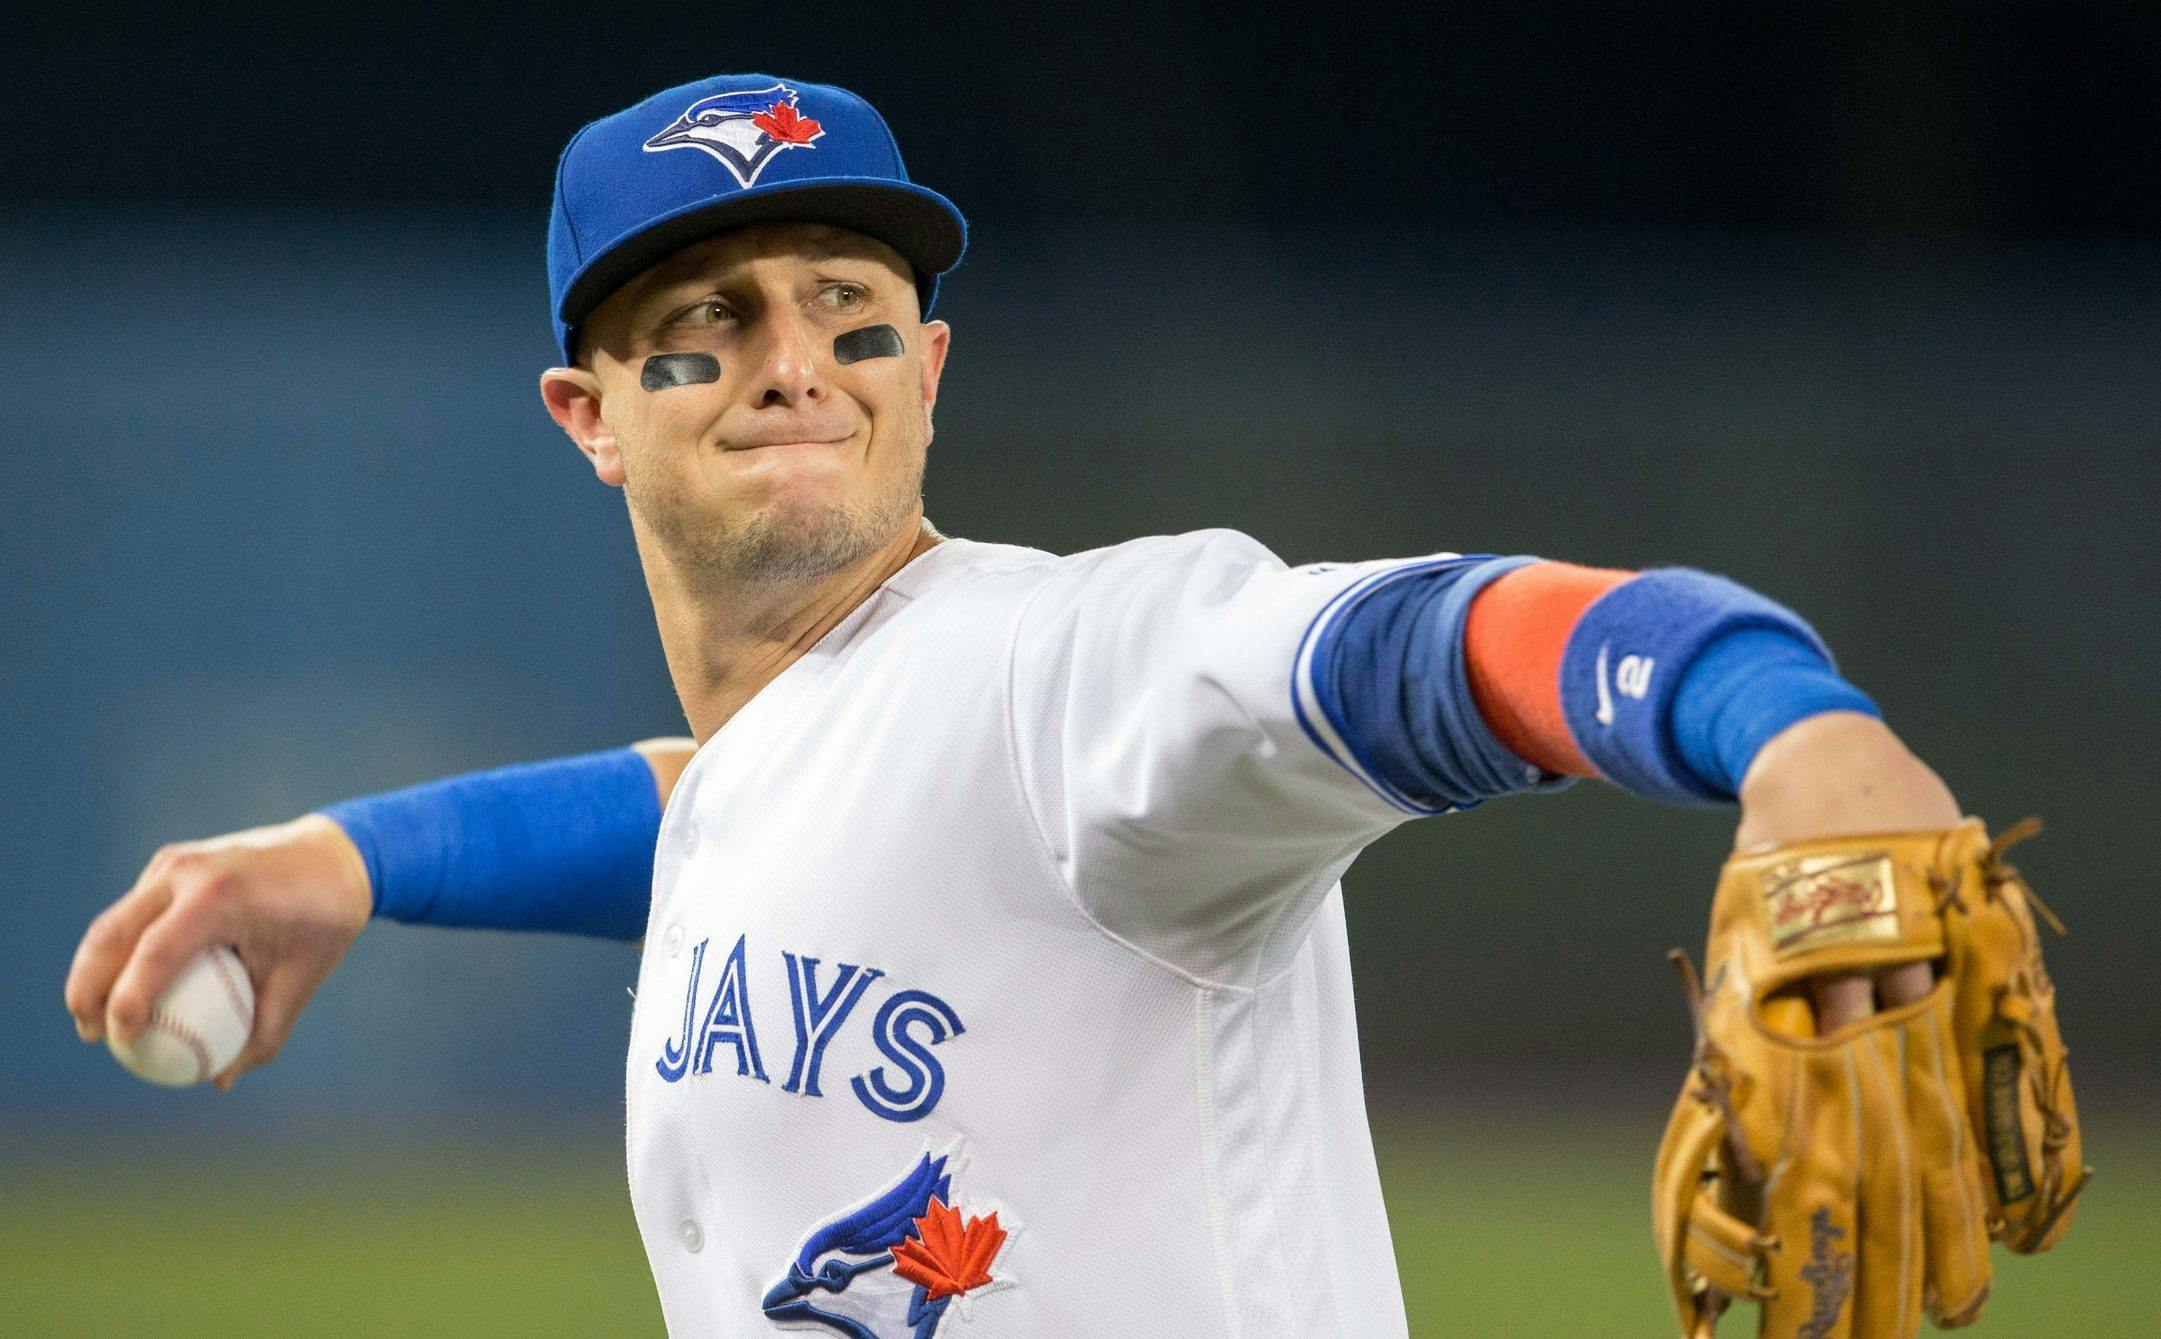 Tulo: The complicated Legacy of Shortstop Troy Tulowitzki